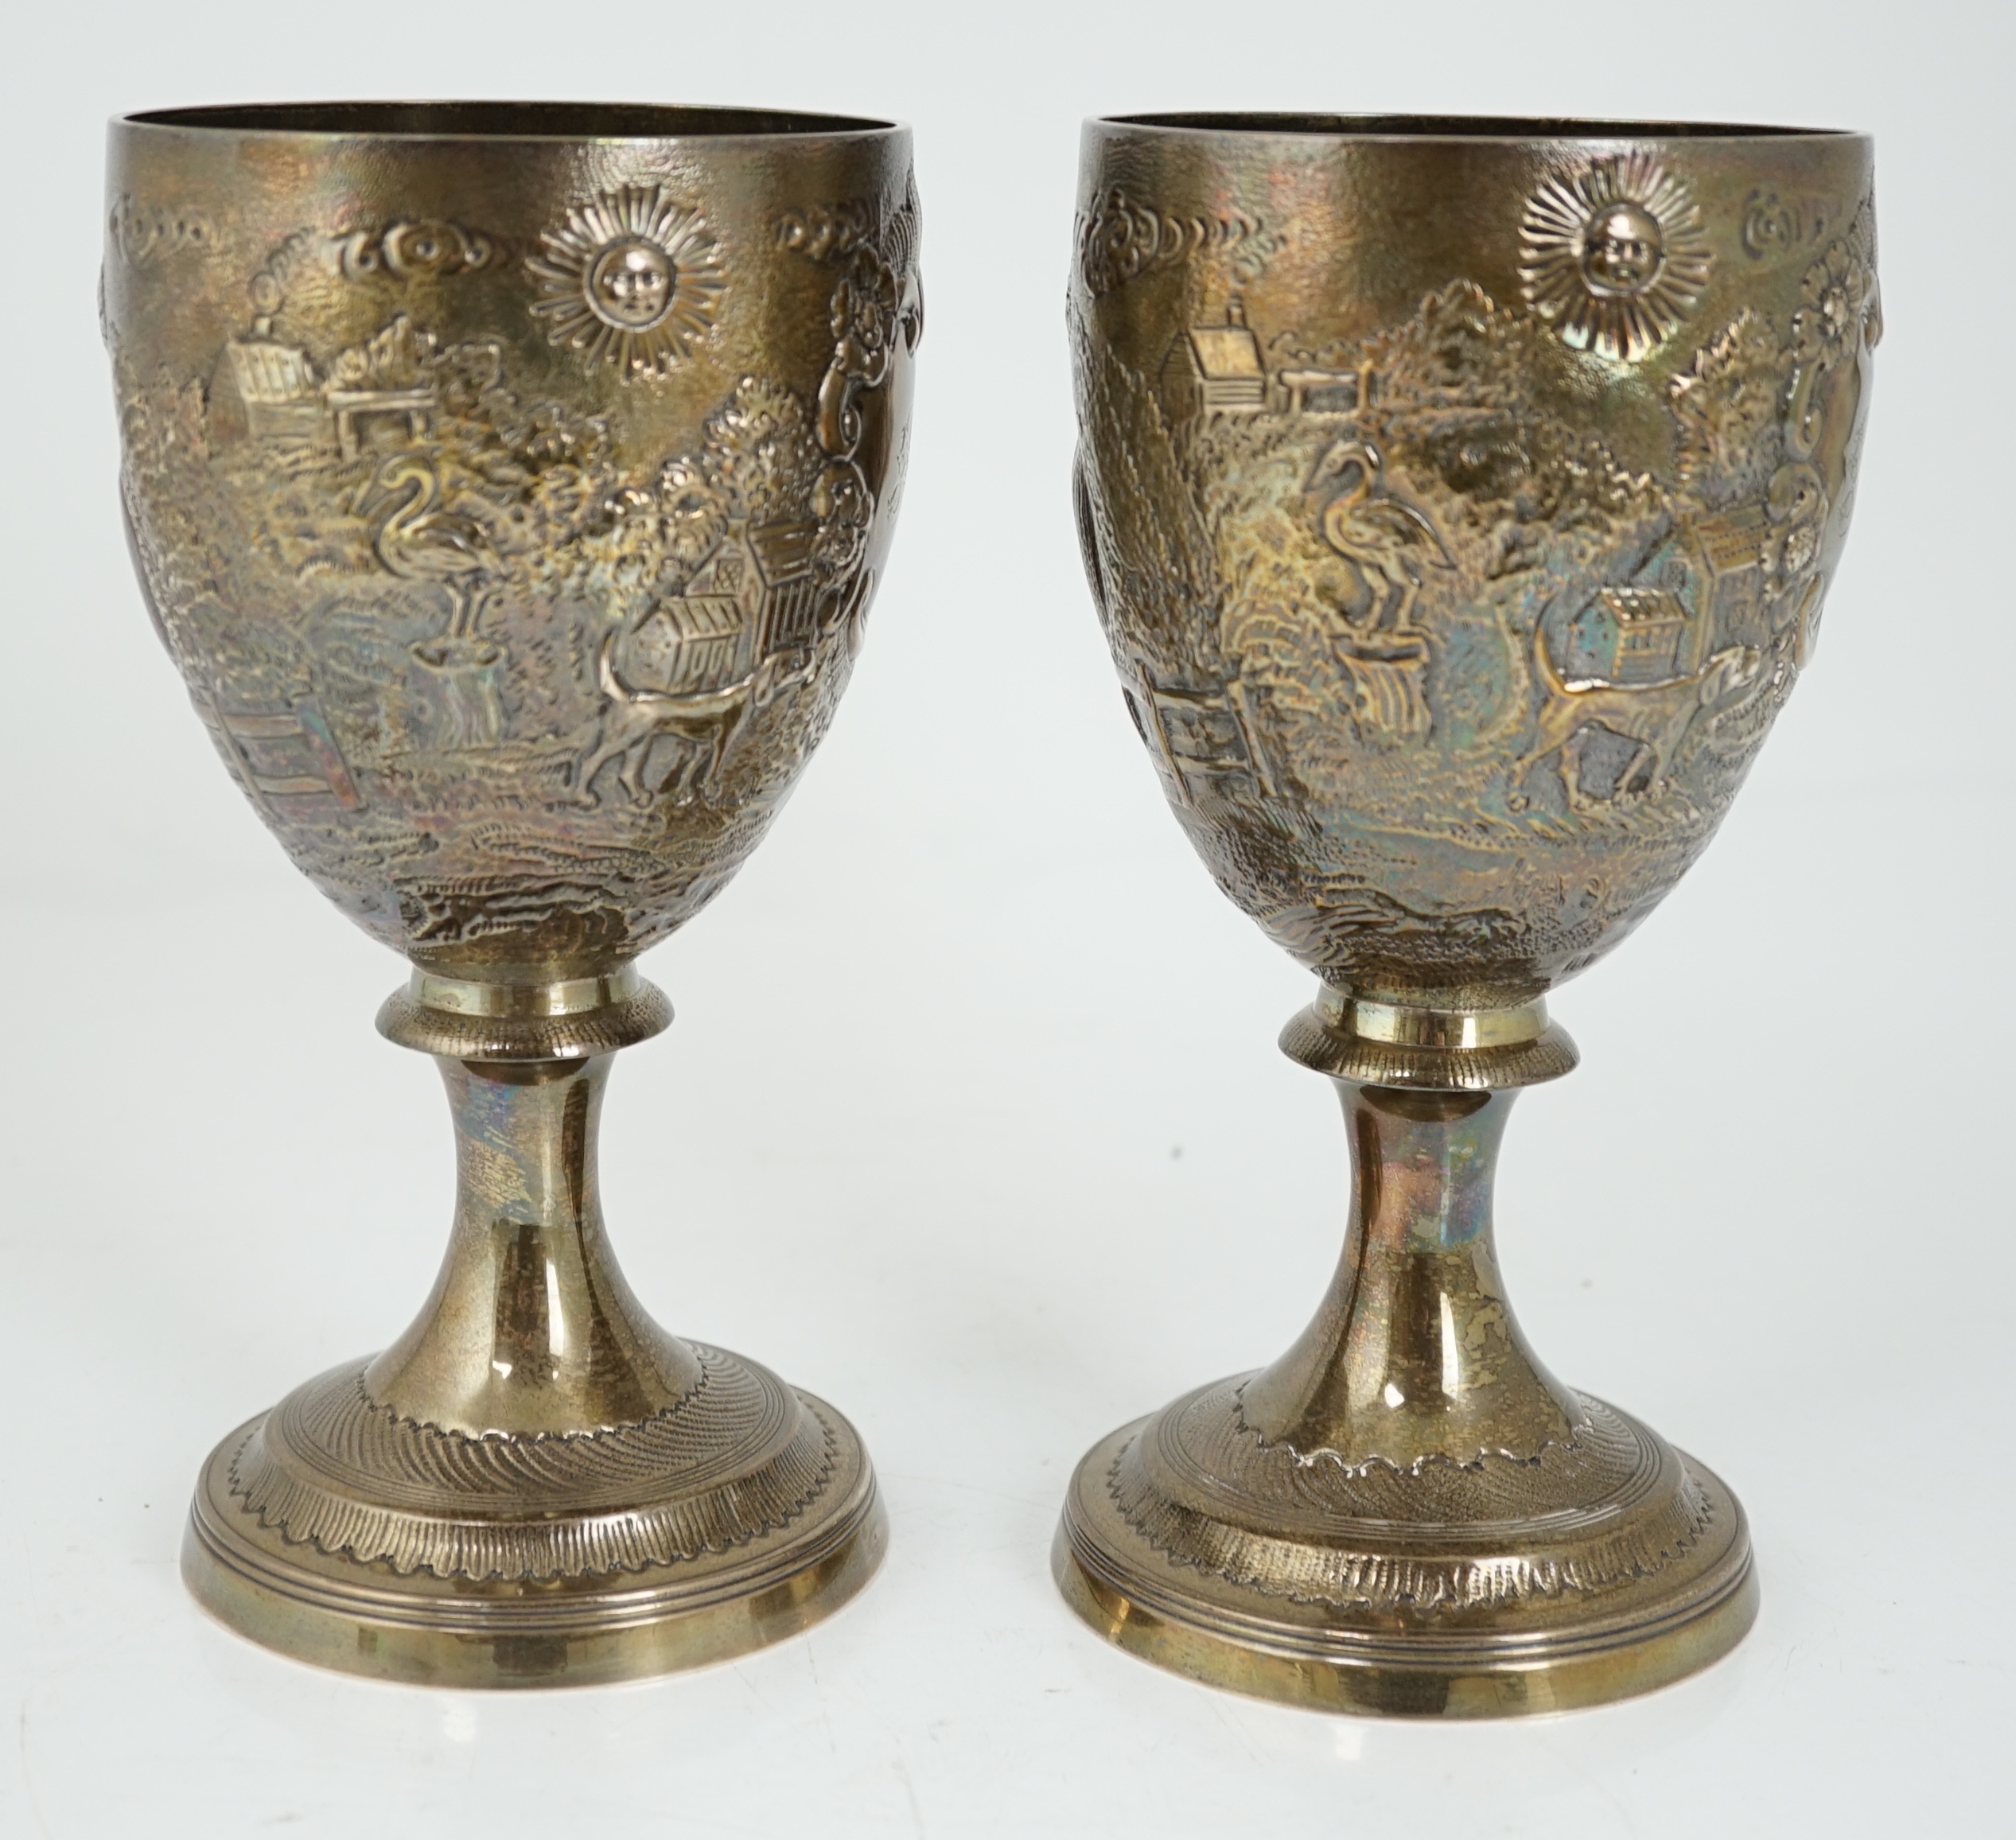 A pair of George III silver goblets, by Robert & Samuel Hennel